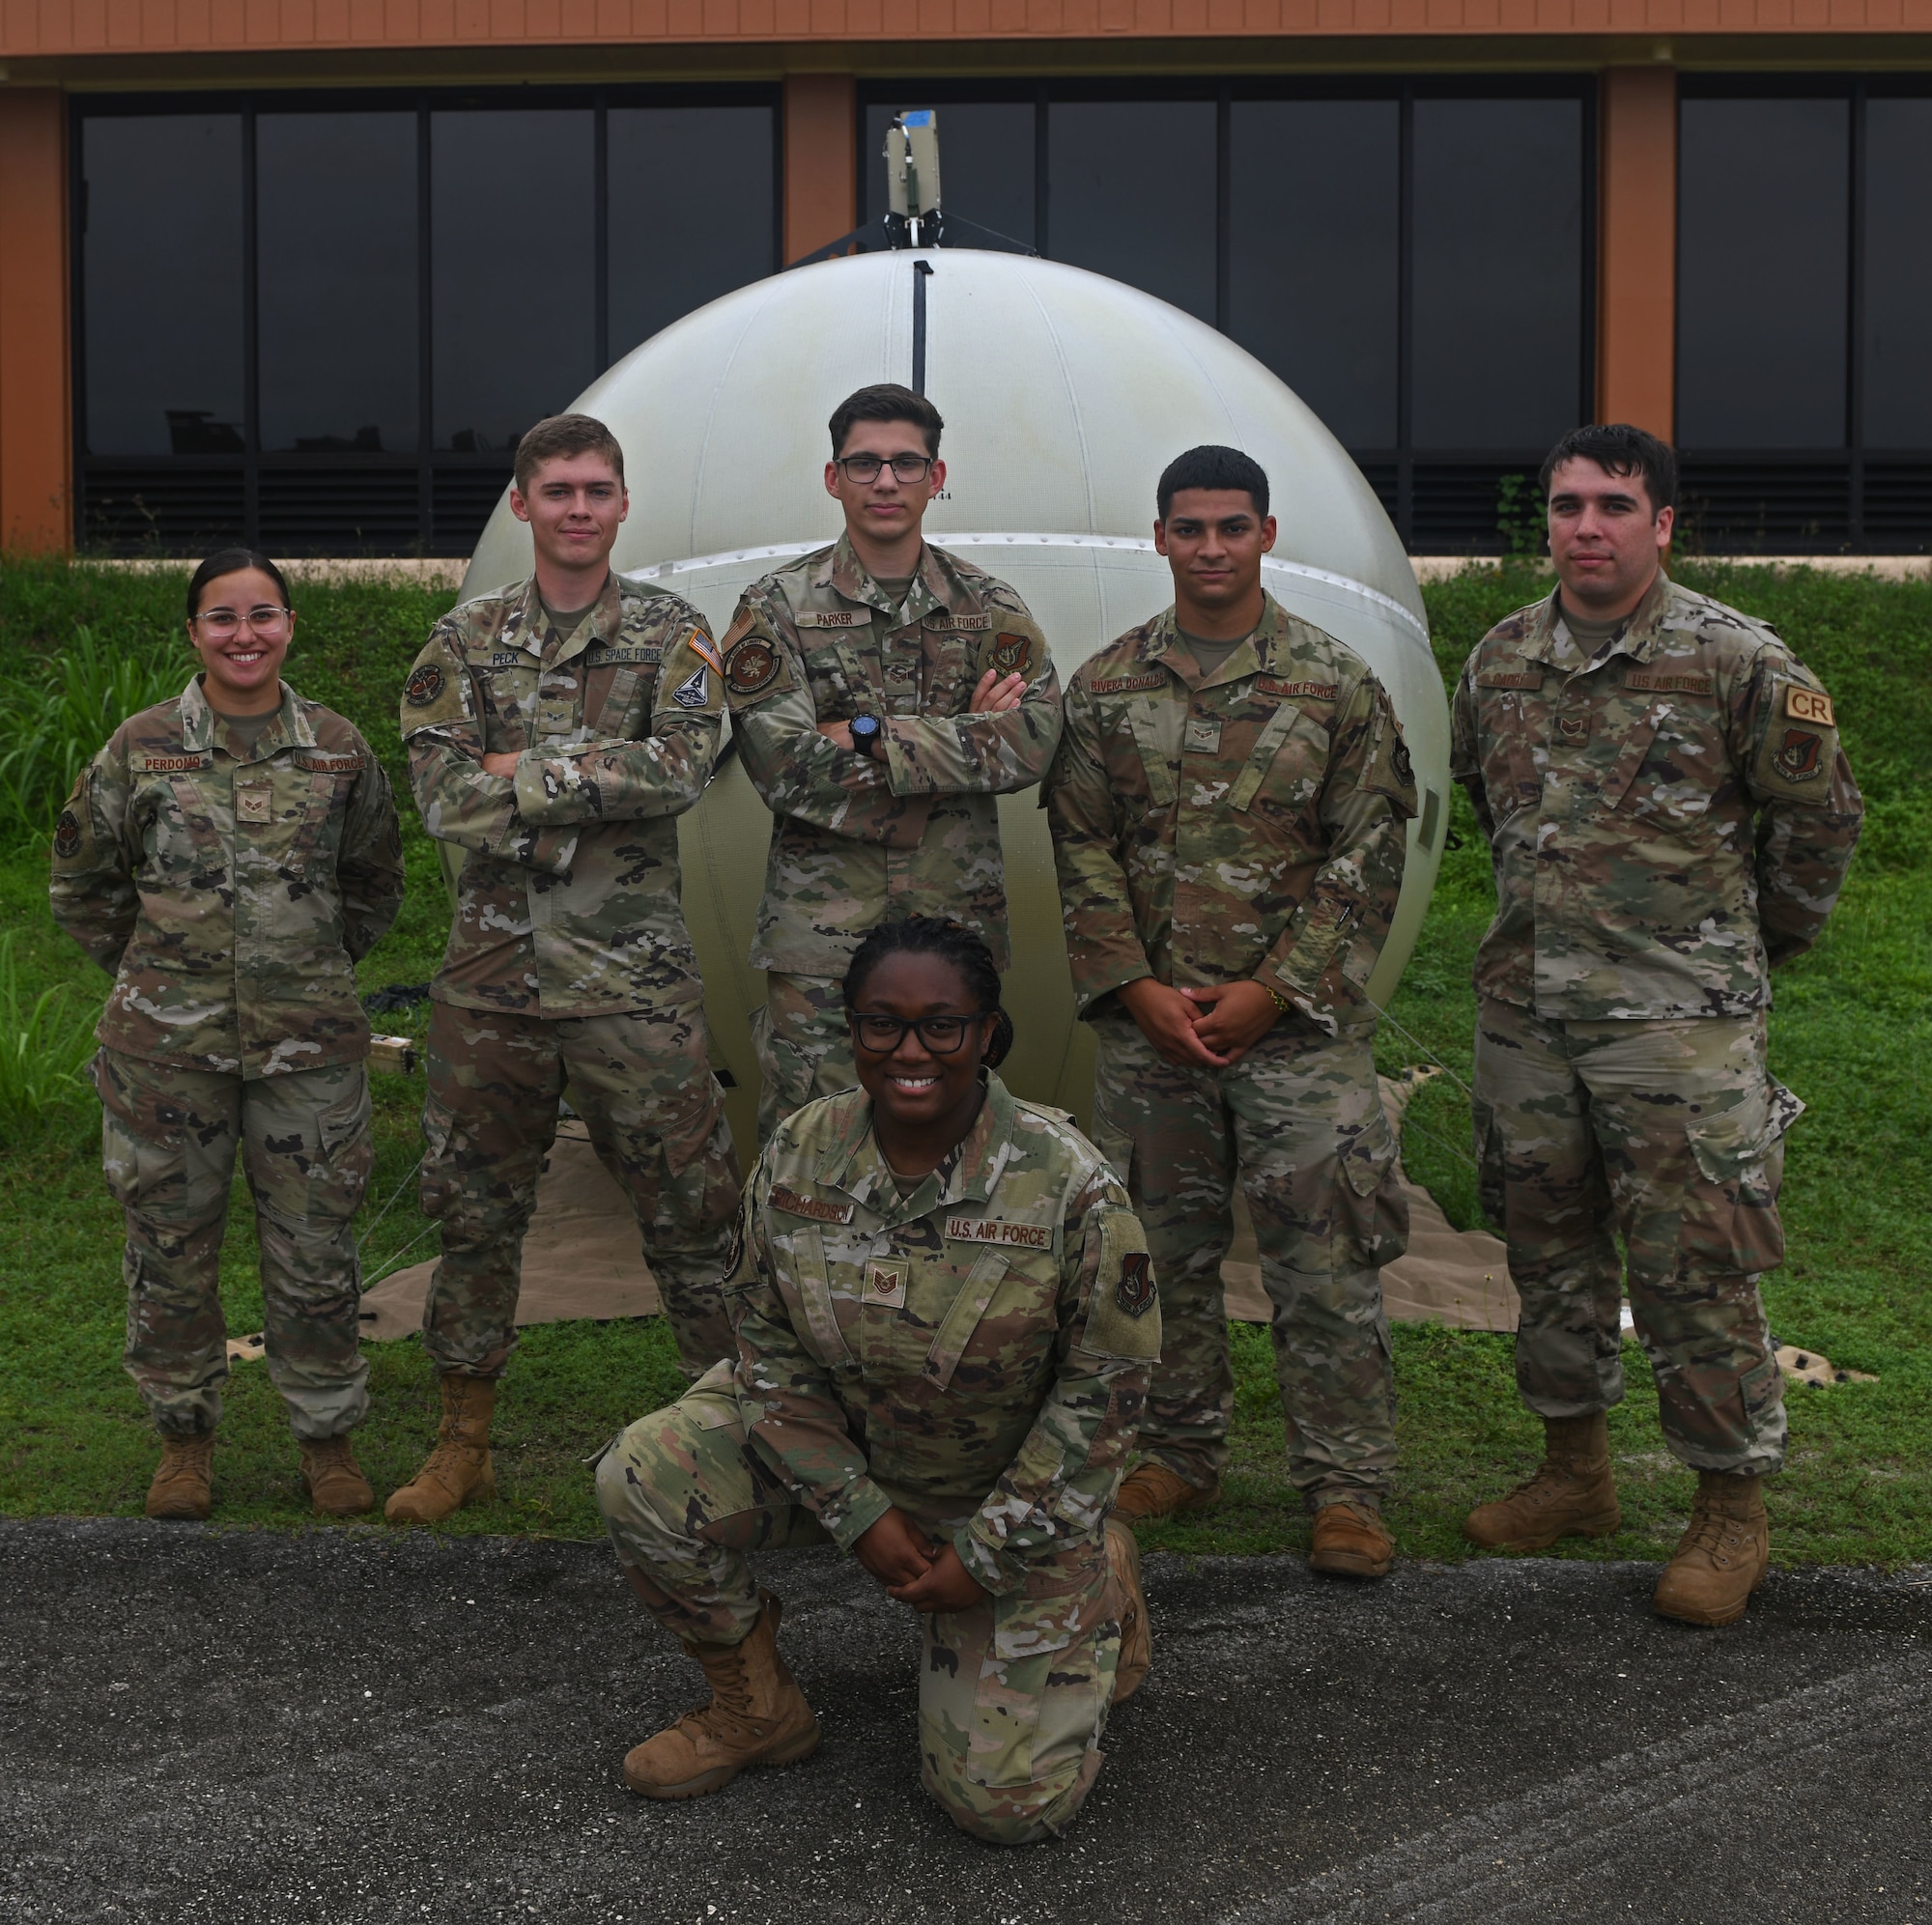 A joint team of U.S. Air Force Airmen and a U.S. Space Force Guardian from the 673rd Communications Squadron, Joint Base Elmendorf-Richardson, Alaska, and the 644th Combat Communications Squadron, Andersen Air Force Base, Guam, pose for a photo at the Tinian International Airport, Tinian, during Pacific Iron 2021, Aug. 2, 2021. Pacific Iron 2021 is a Pacific Air Forces dynamic force employment operation to project forces into USINDOPACOM’s area of responsibility in support of the 2018 National Defense Strategy which called on the military to be a more lethal, adaptive, and resilient force. (U.S. Air Force photo by Tech. Sgt. Benjamin Sutton)